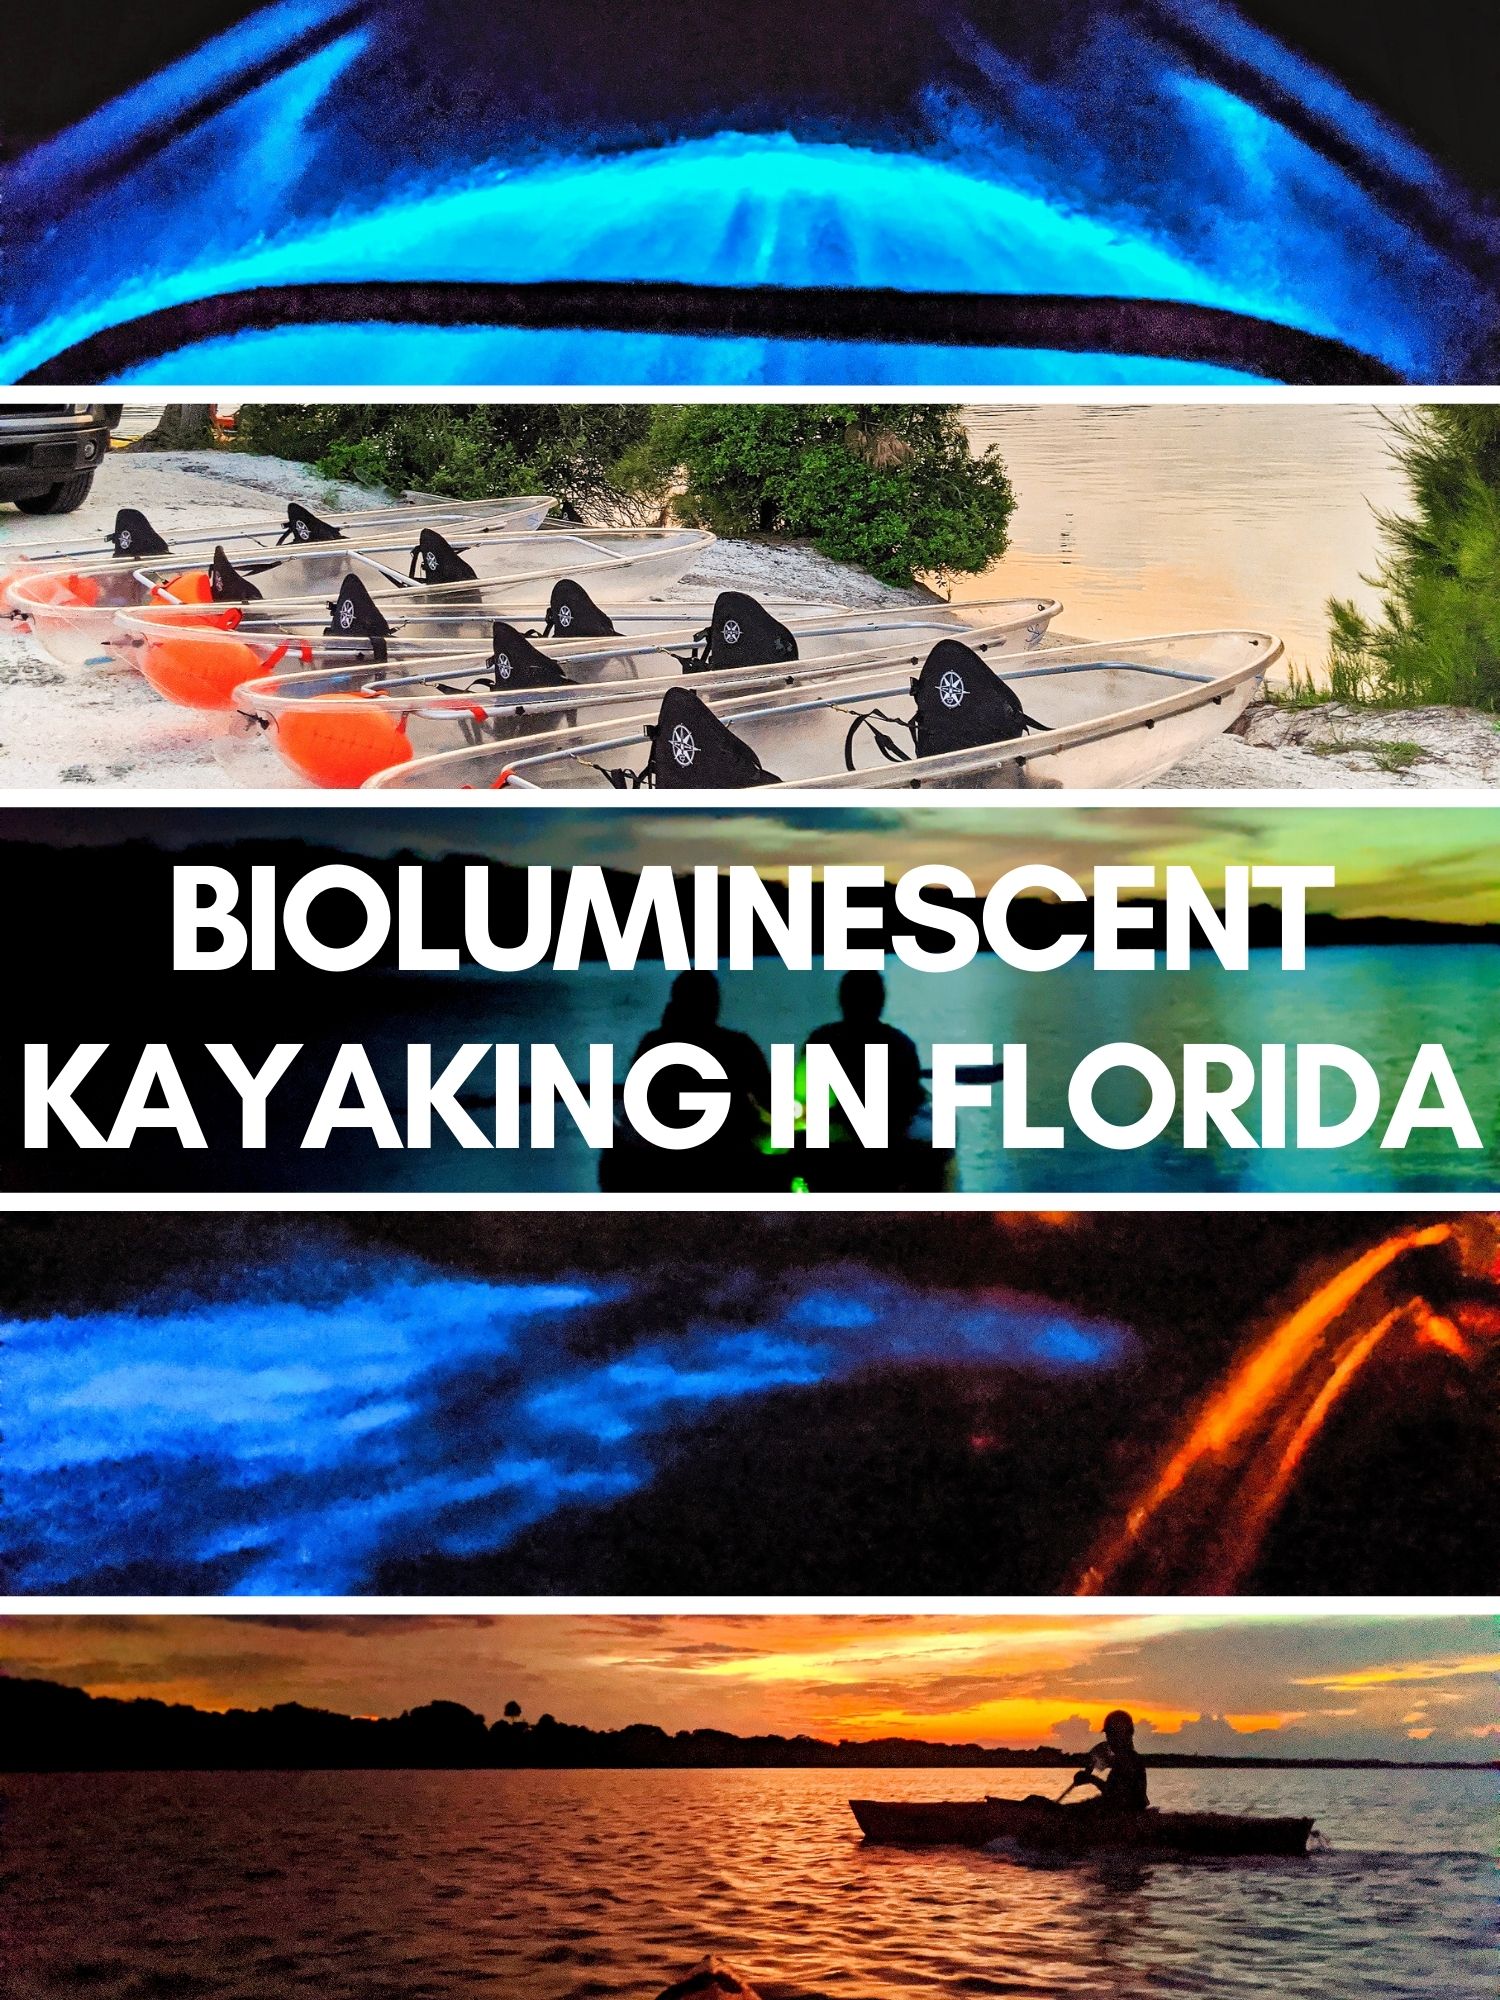 Bioluminescent Kayaking: Florida's Best Kept (odd) Thrilling Magical Secret. Where to go and everything you need to know to experience the wonder of glow in the dark night kayaking.